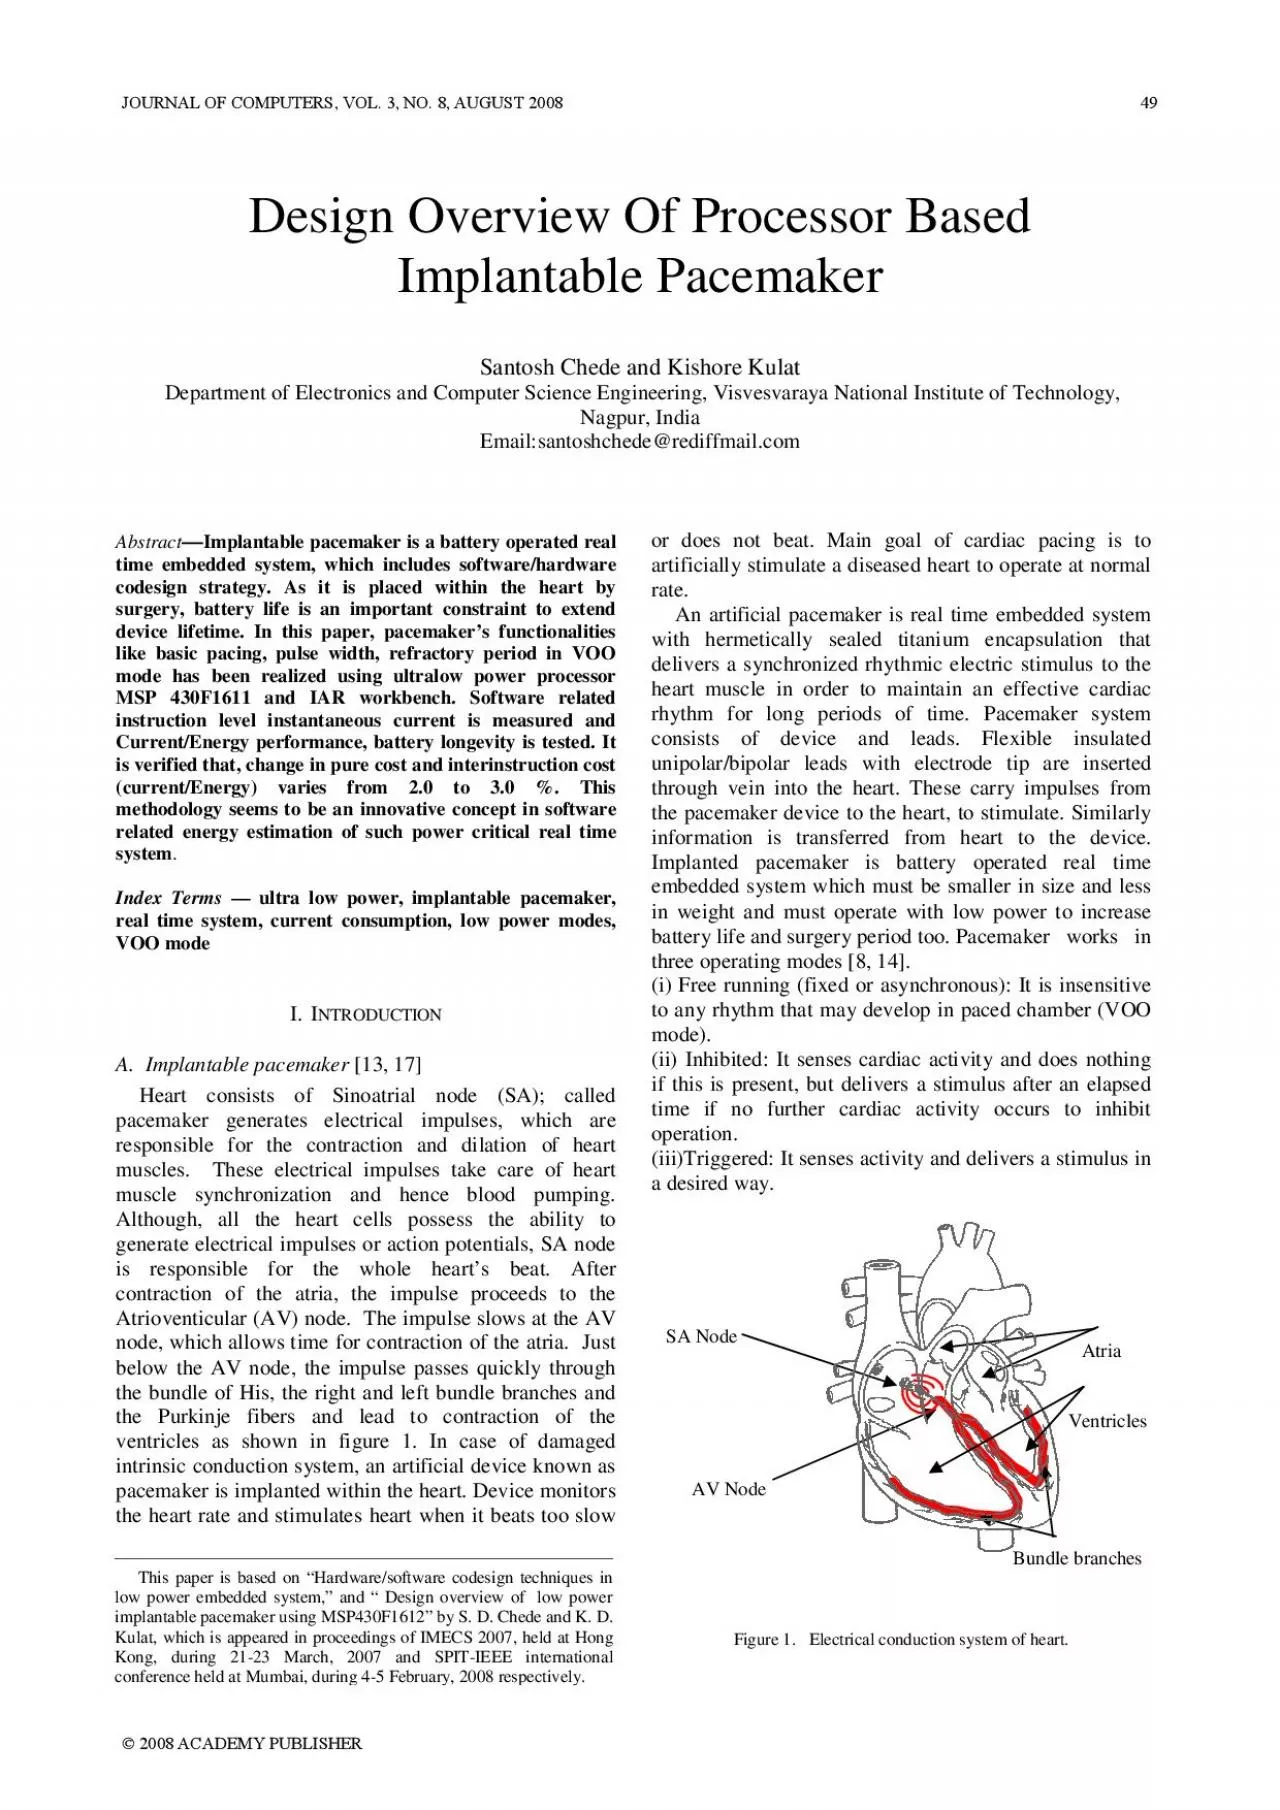 Design Overview Of Processor Based Implantable Pacemaker Santosh Chede